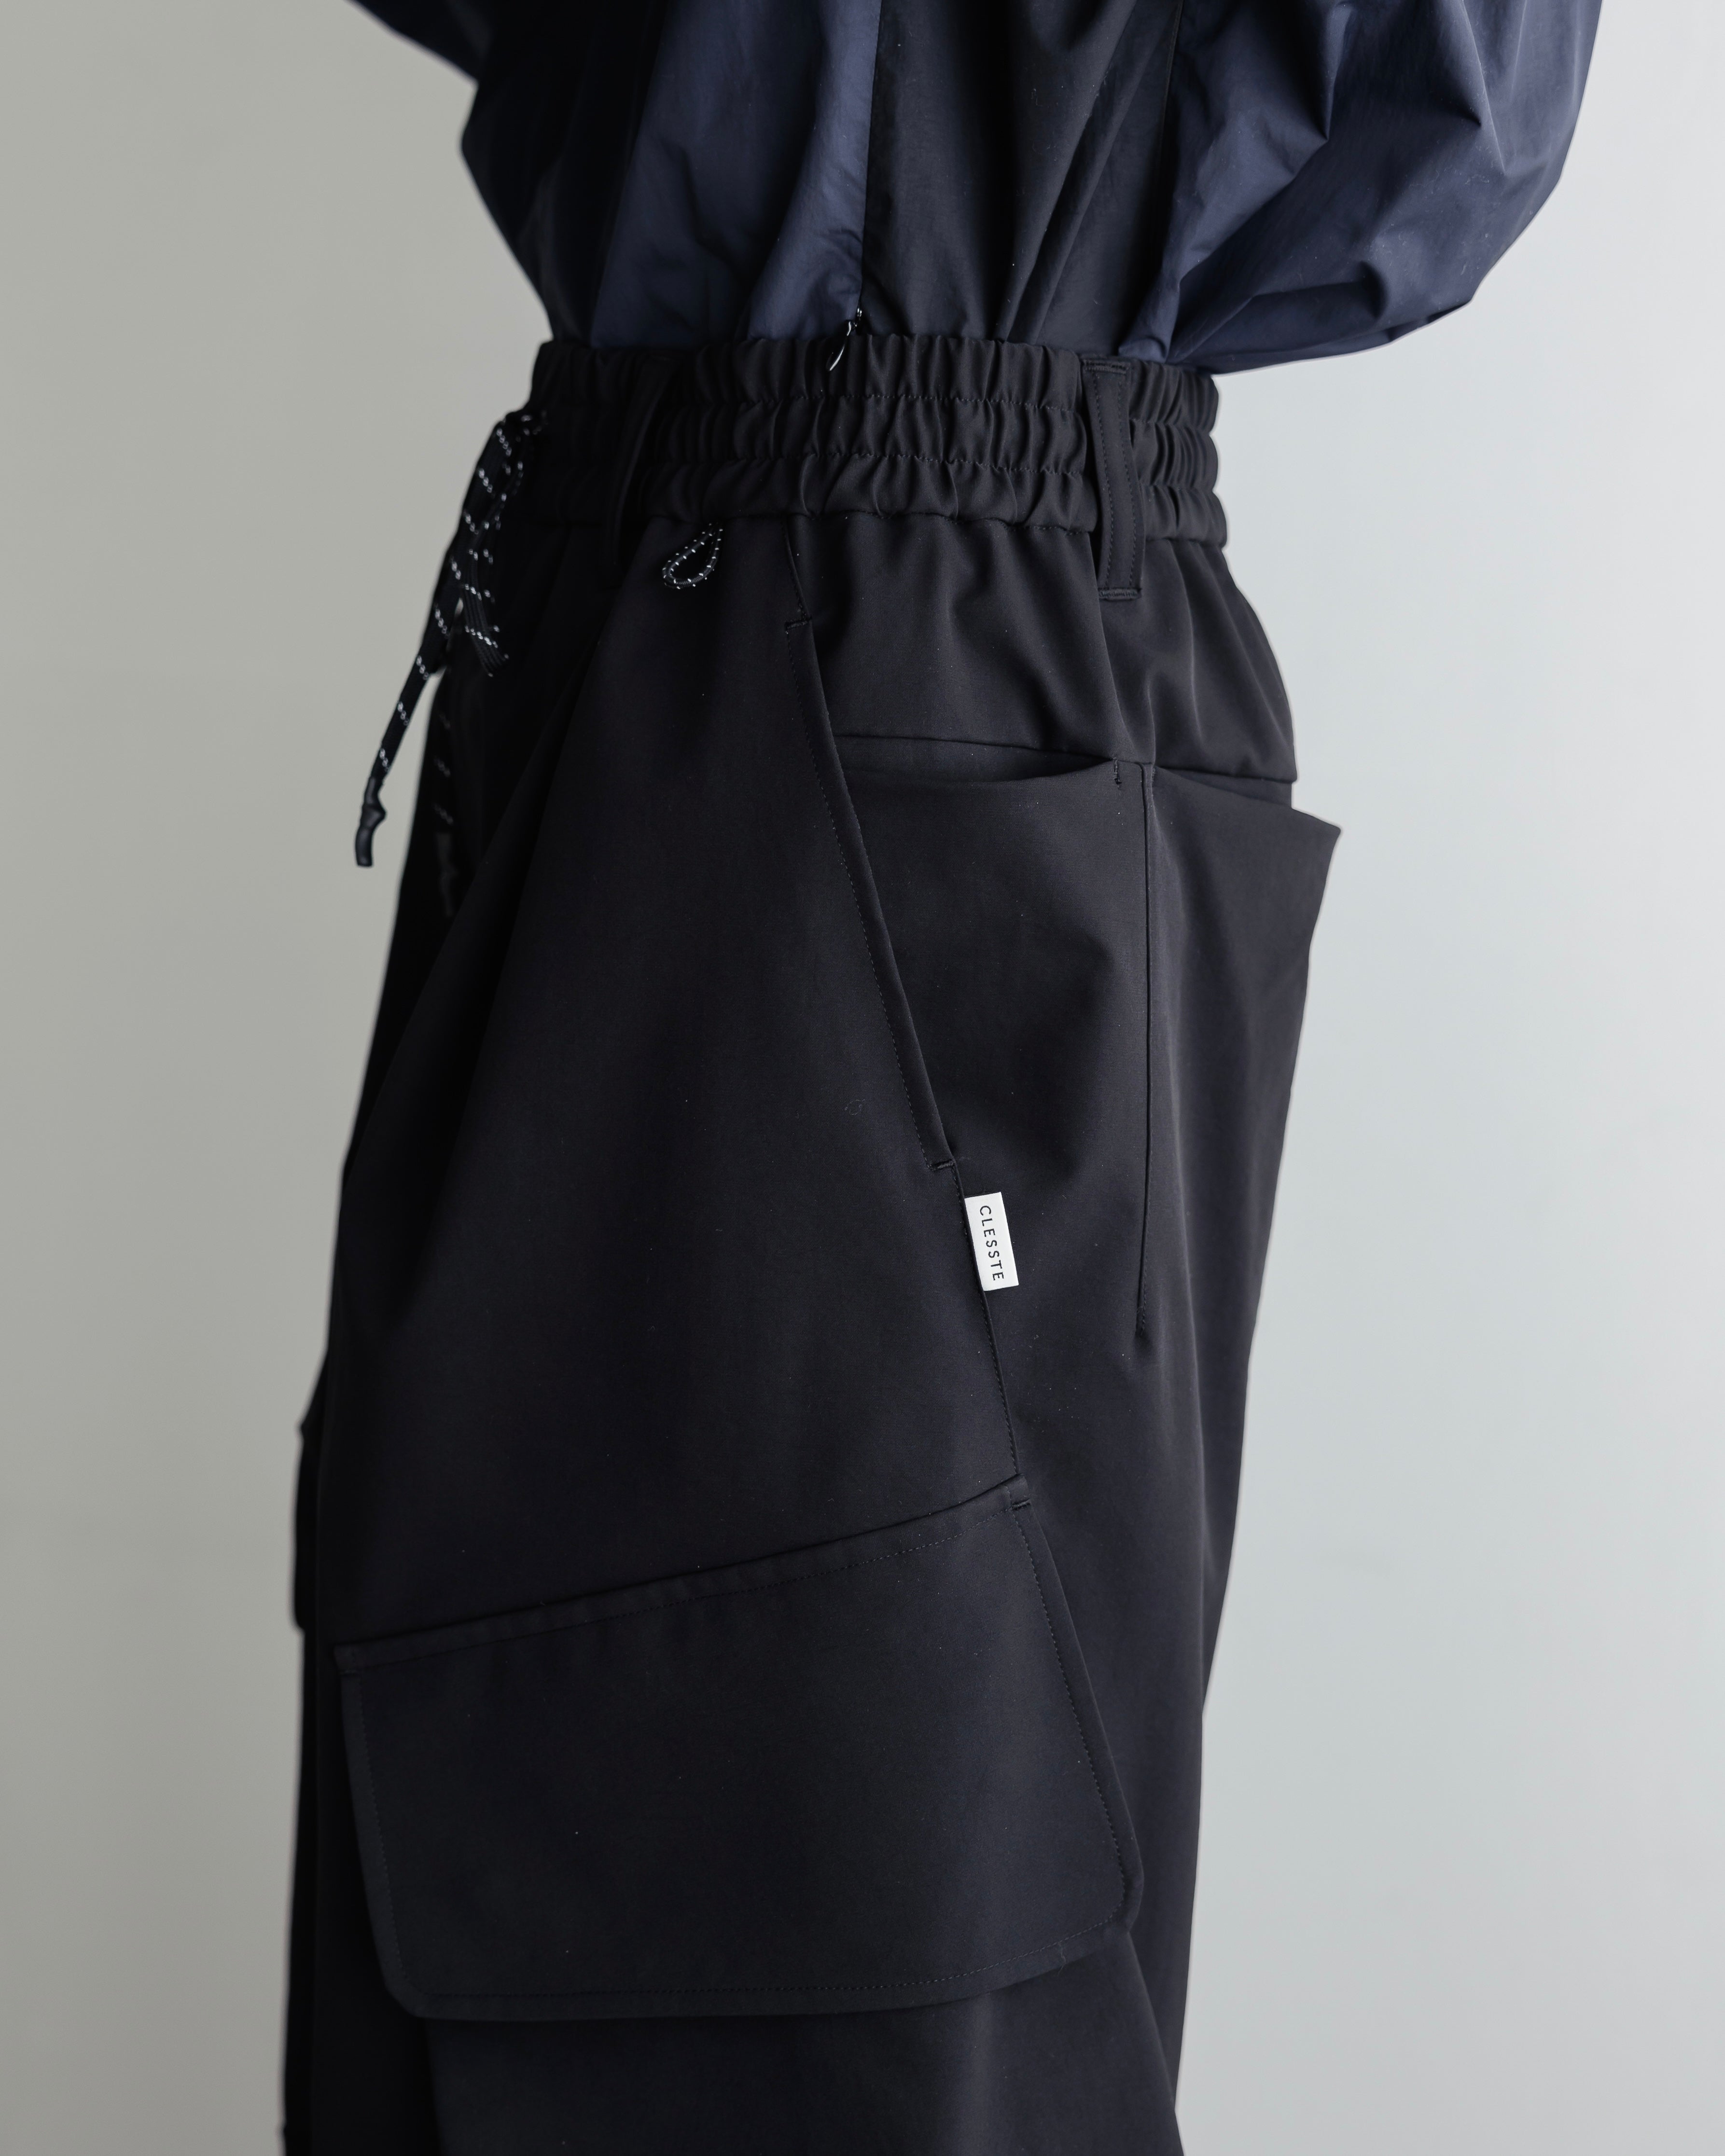 SOFT SHELL WIDE CARGO PANTS